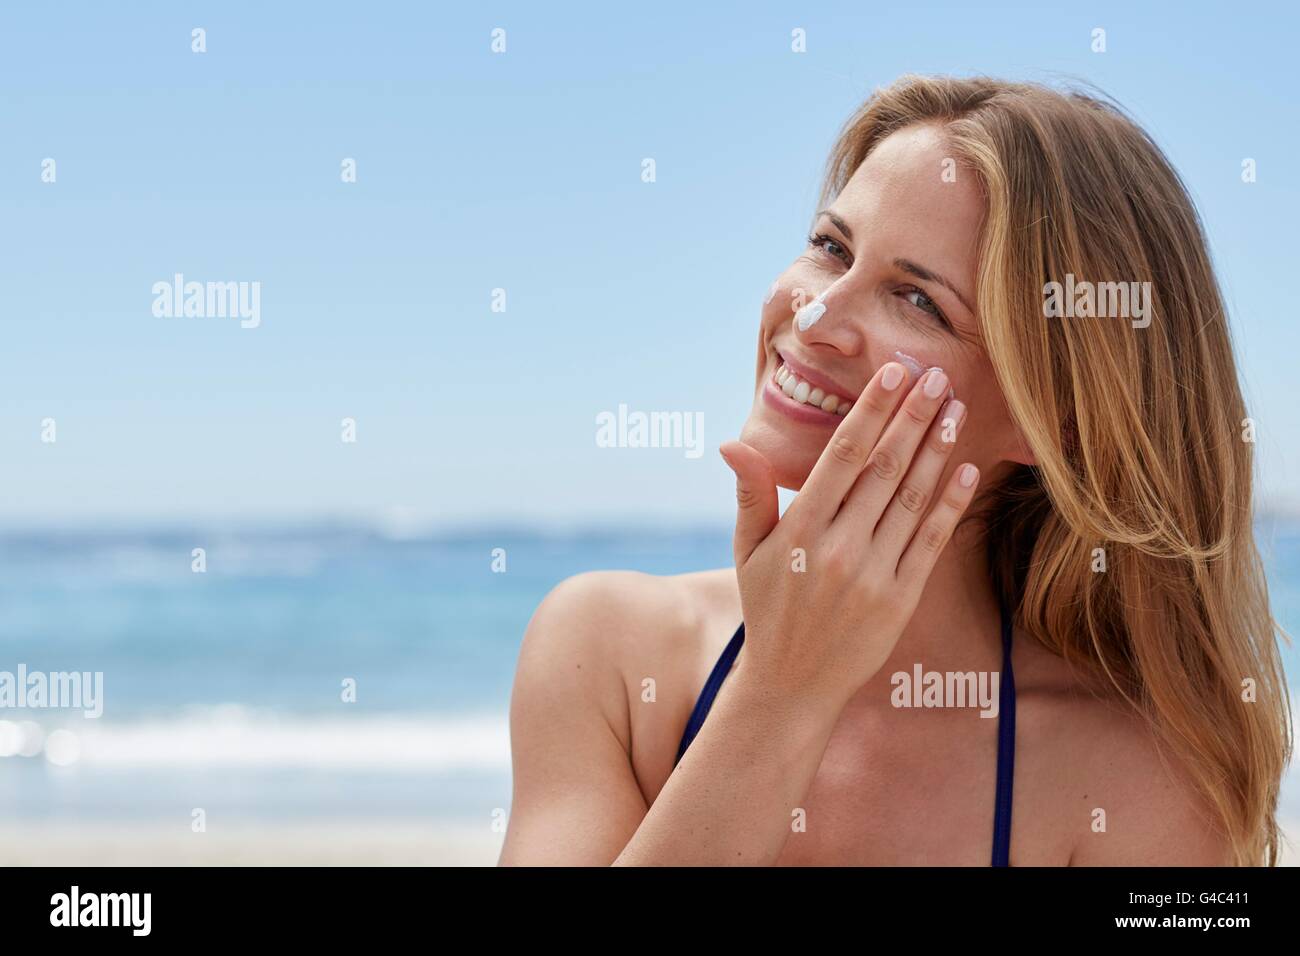 MODEL RELEASED. Young woman applying sun cream on the beach. Stock Photo